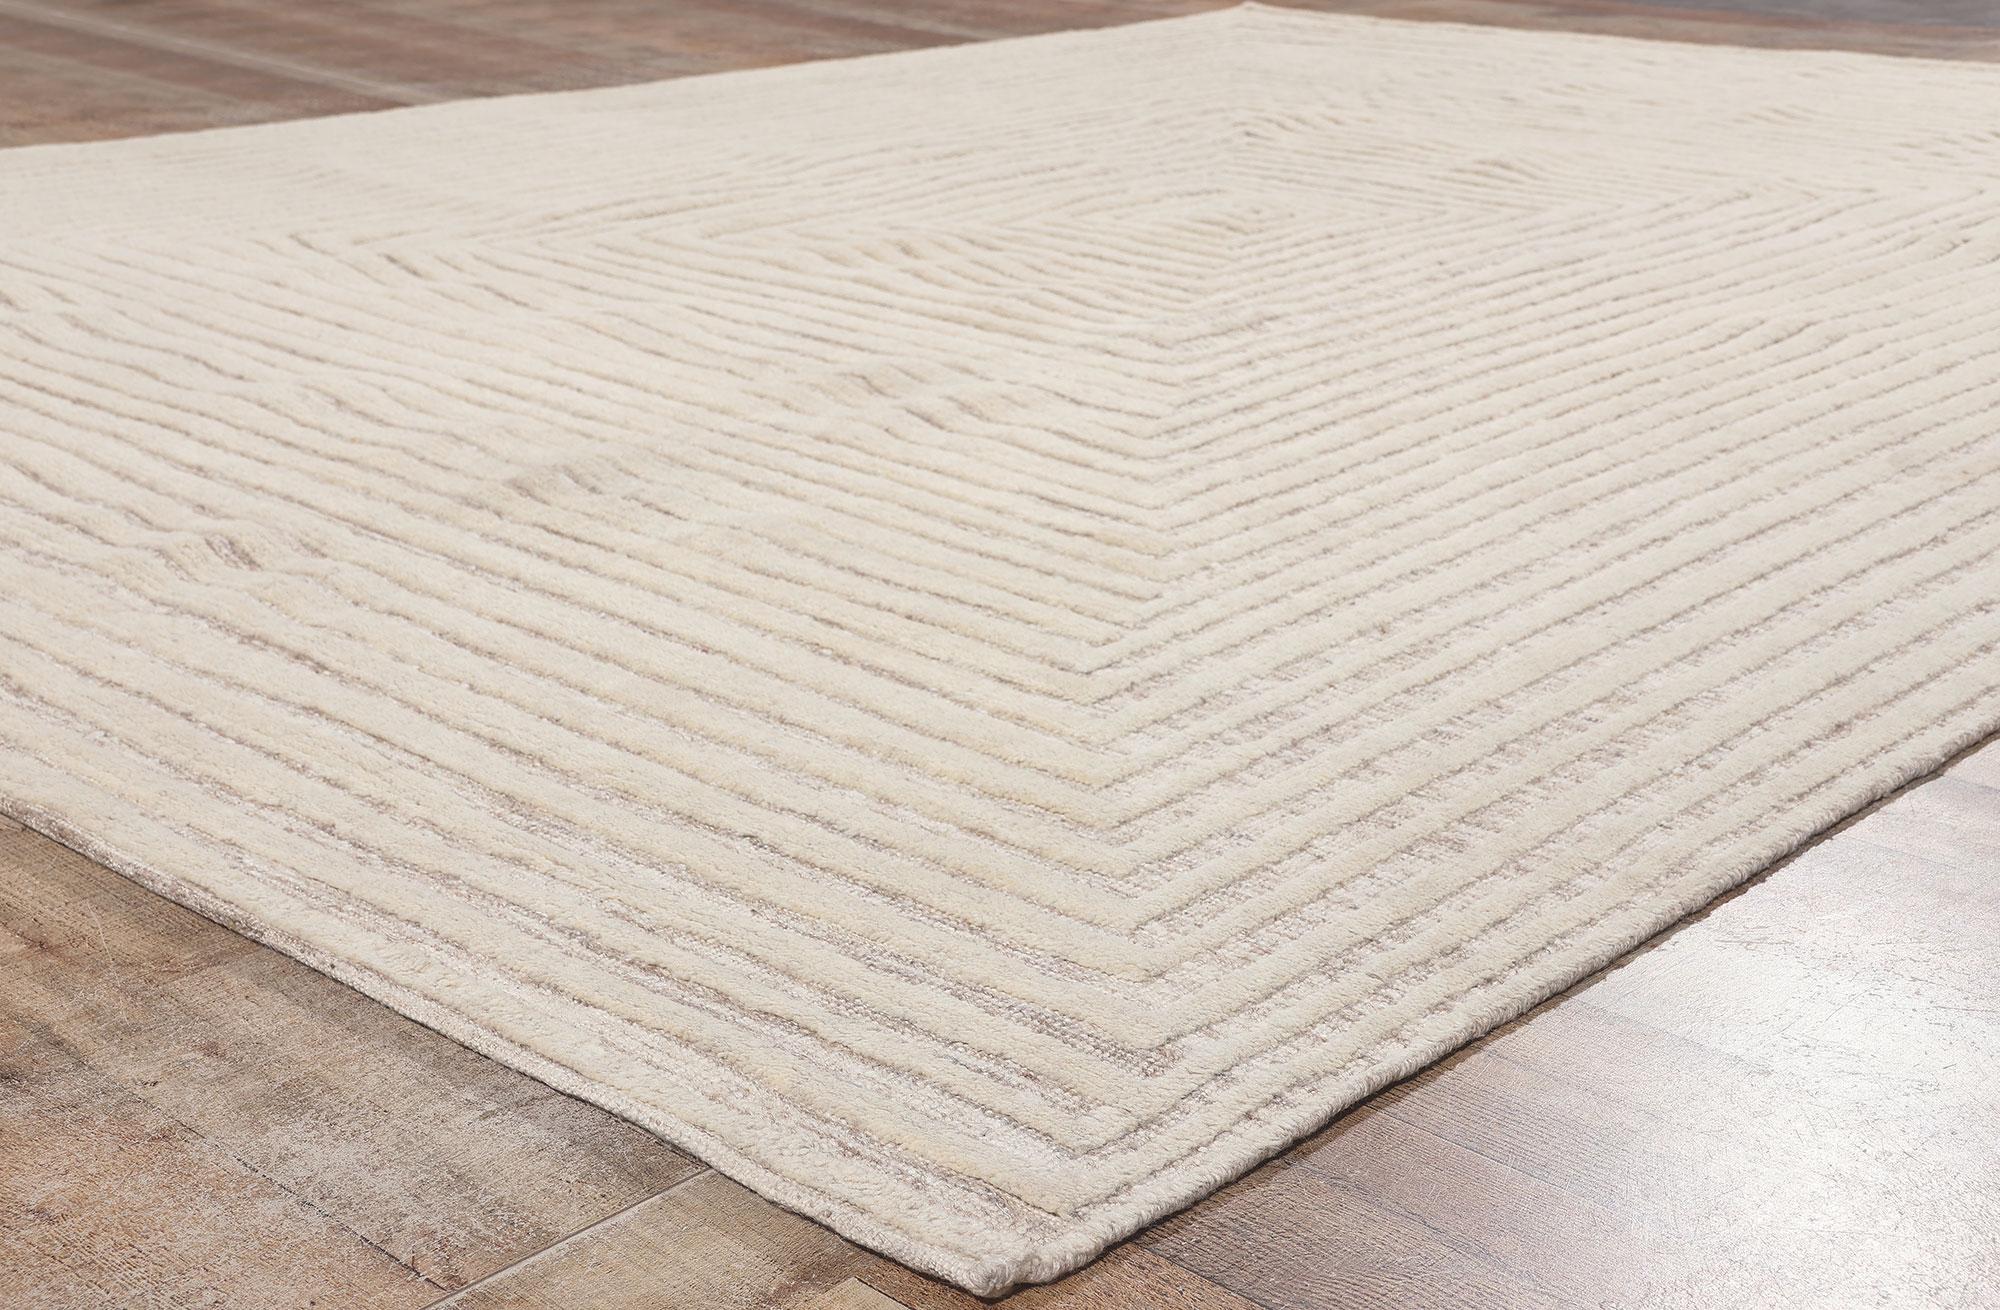 Contemporary Modern Textured High-Low Rug, Sublime Simplicity Meets Tantalizing Texture